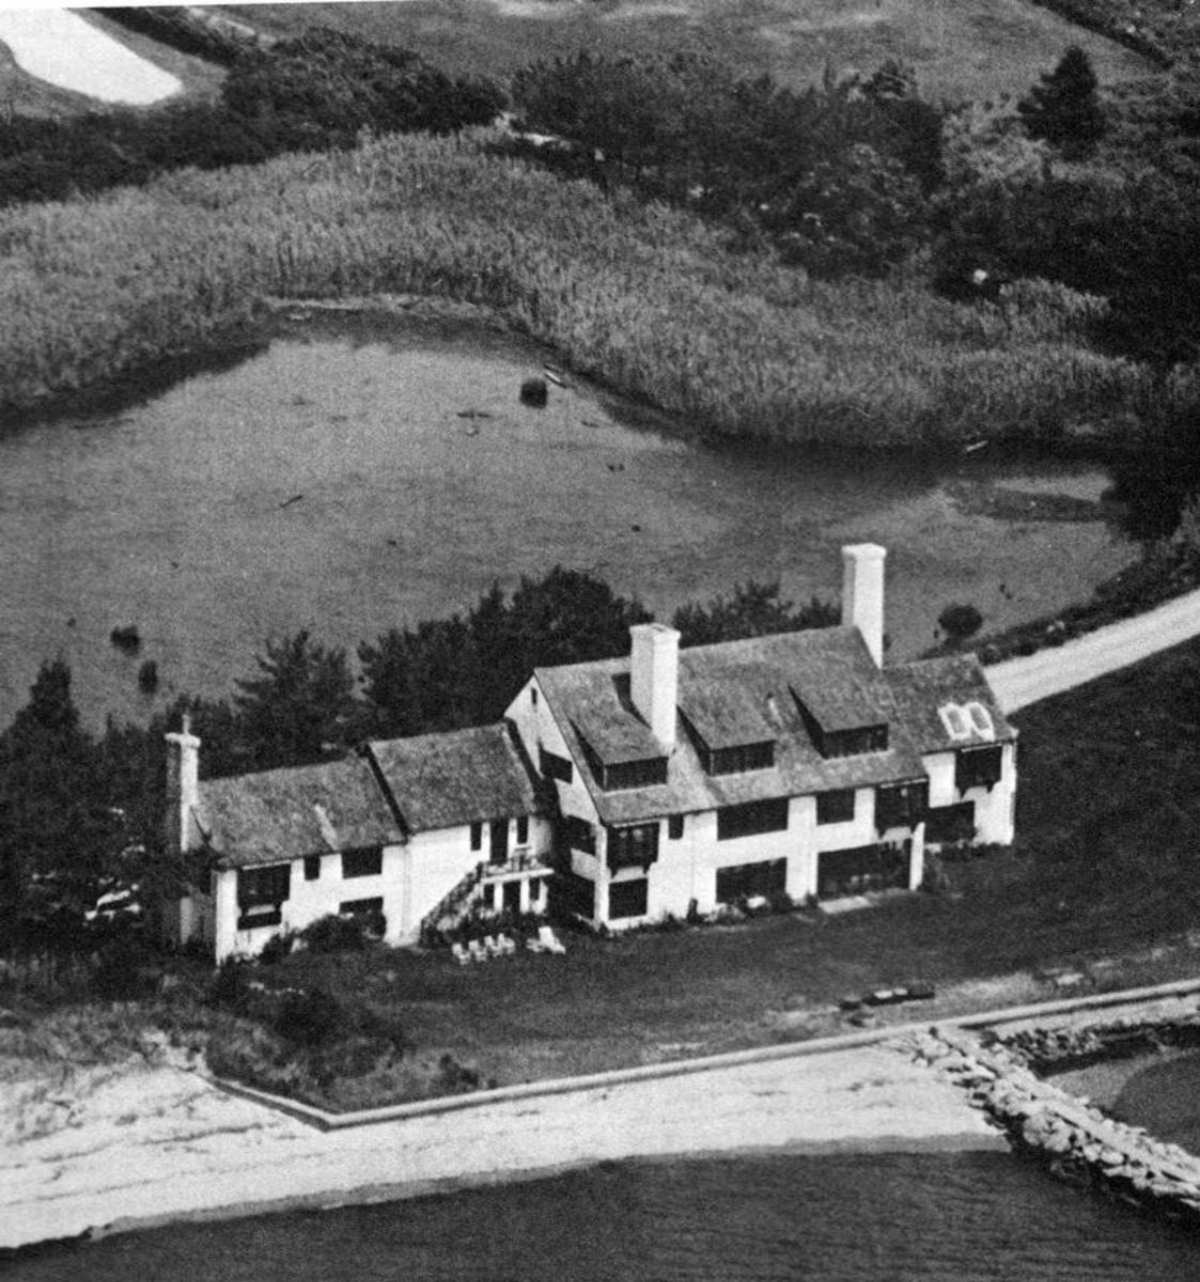 The original beach home of the Hepburn family at Fenwick in Old Saybrook, CT. It was completely destroyed in the 1938 hurricane.